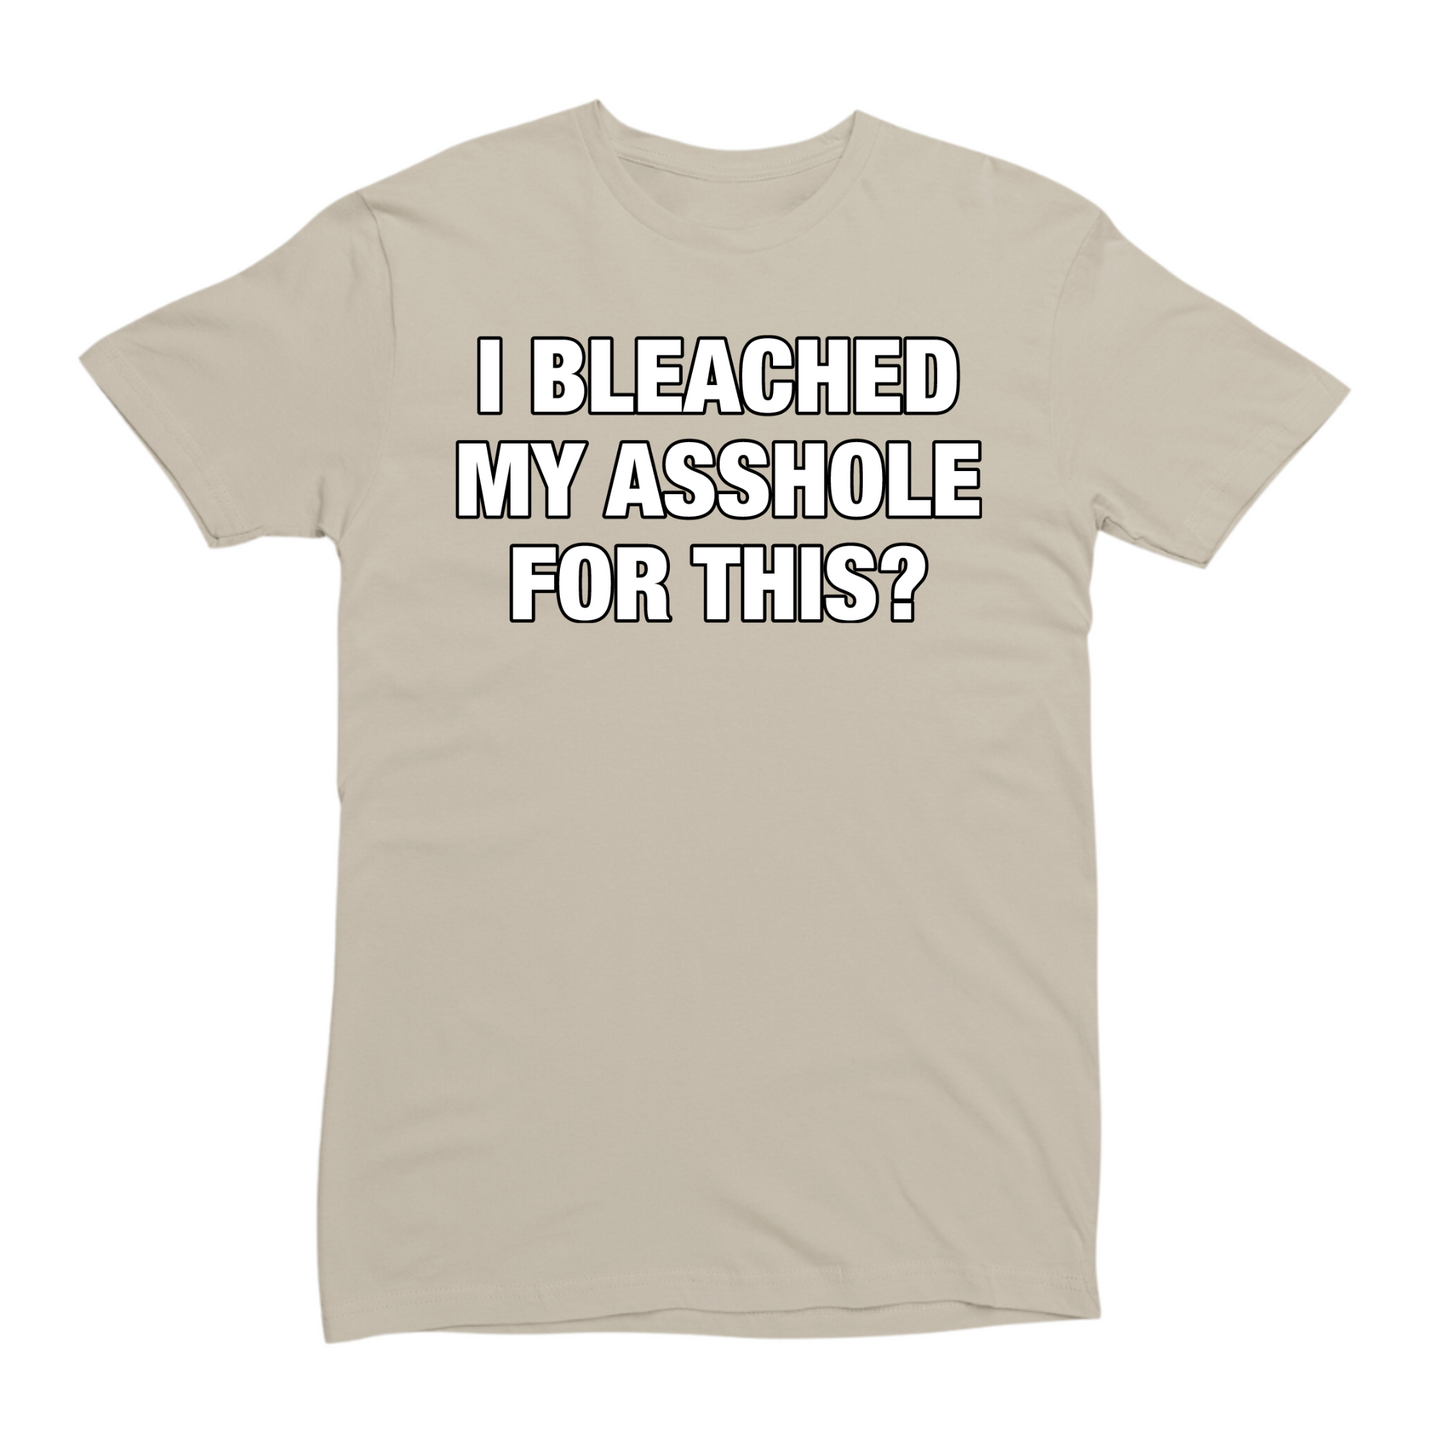 I Bleached My Asshole For This? T-Shirt